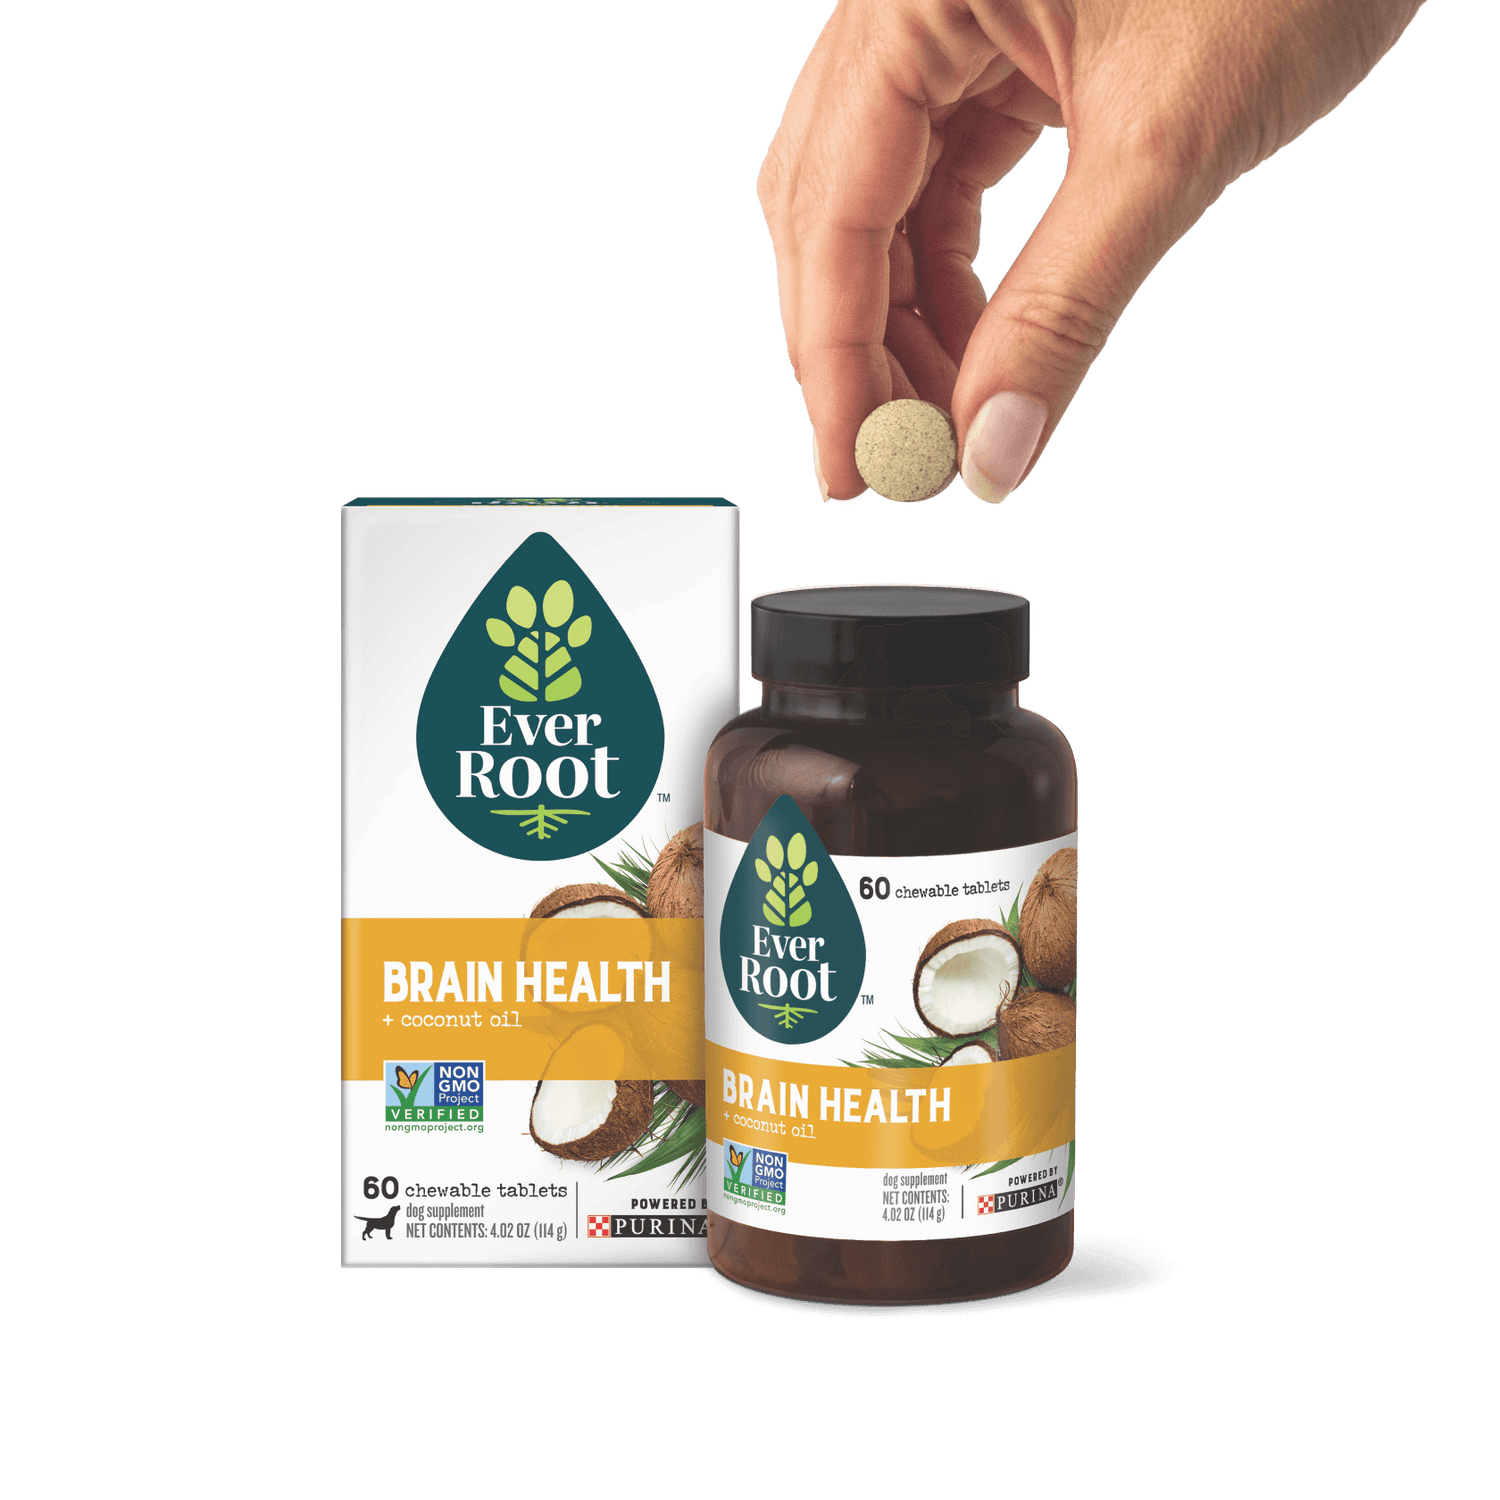 EverRoot Brain Health Chewable Tablets with packaging and hand holding tablet